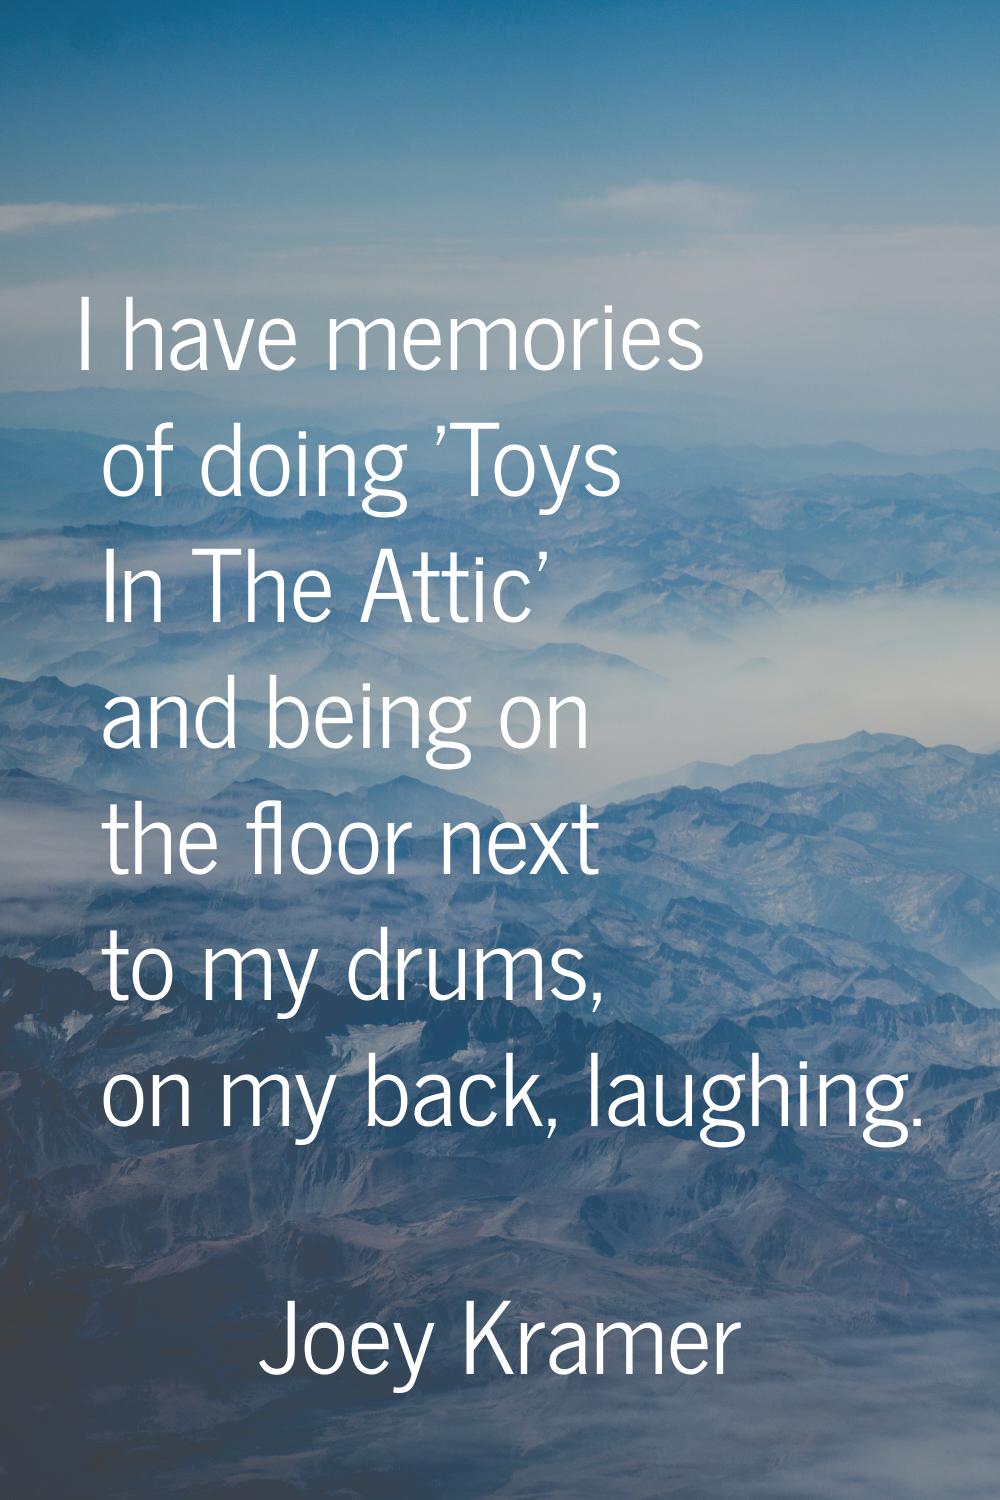 I have memories of doing 'Toys In The Attic' and being on the floor next to my drums, on my back, l